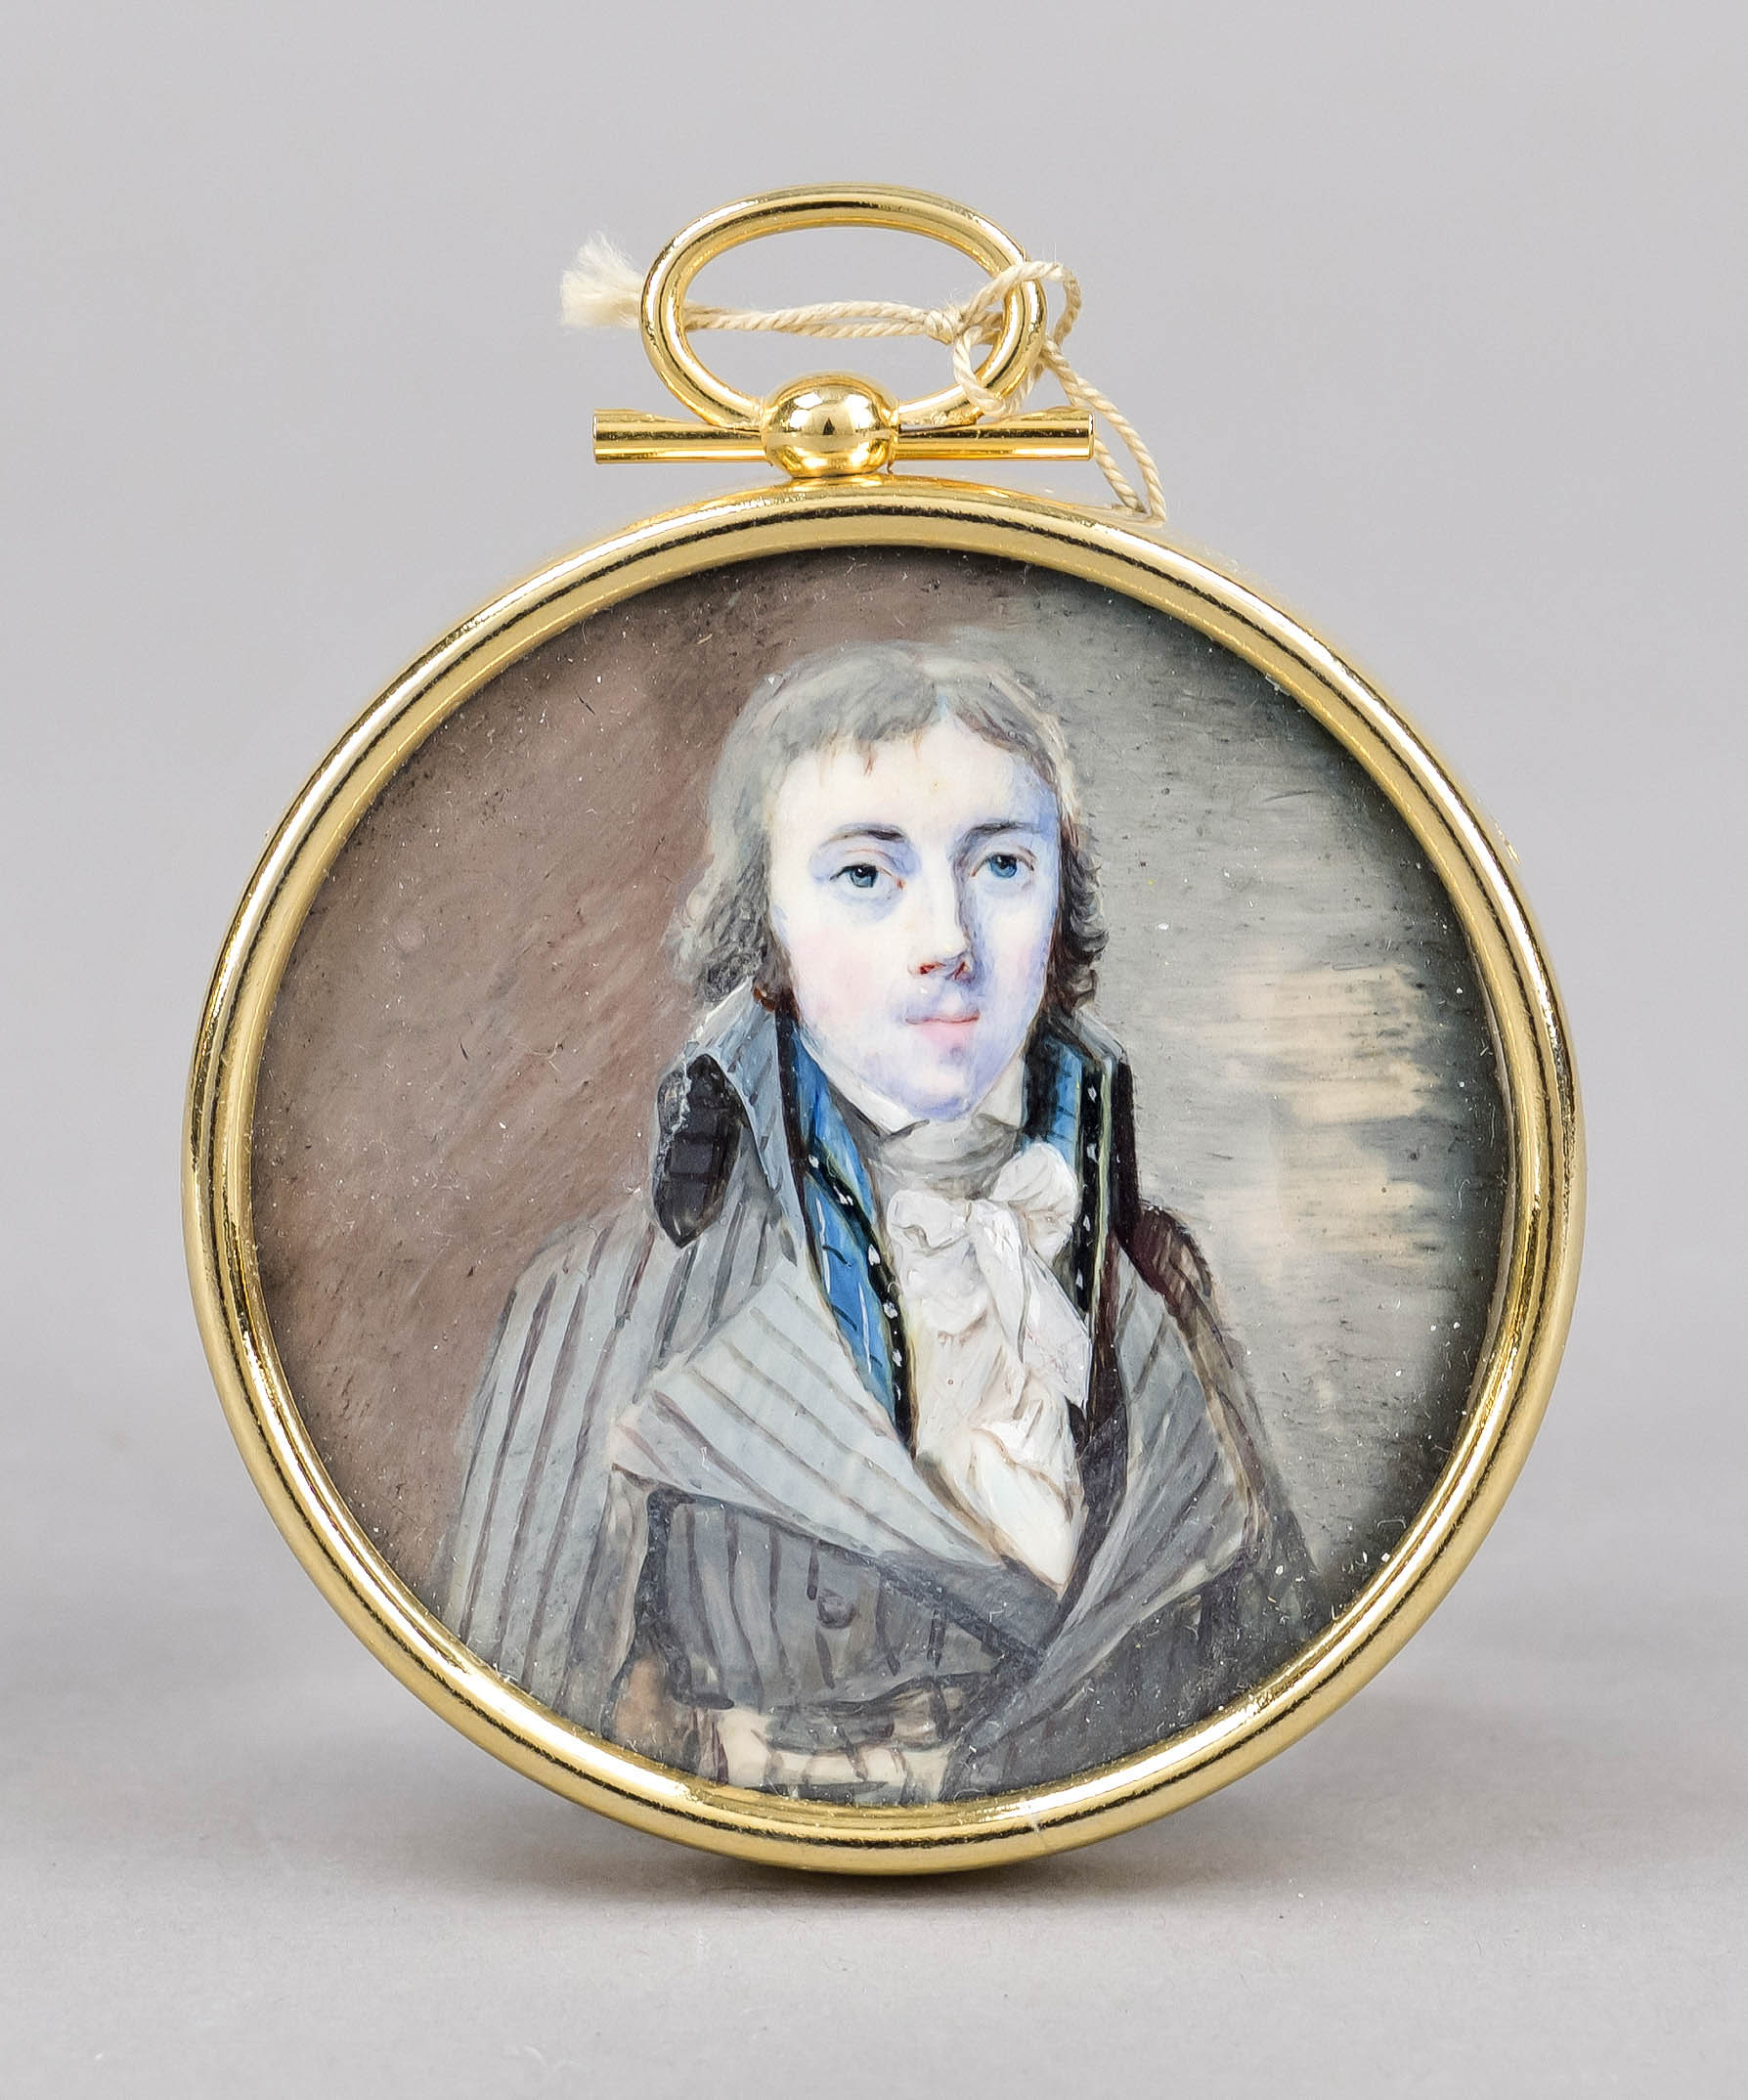 Round miniature, French c. 1790/1795, polychrome tempera painting on a leg plate. Young man in